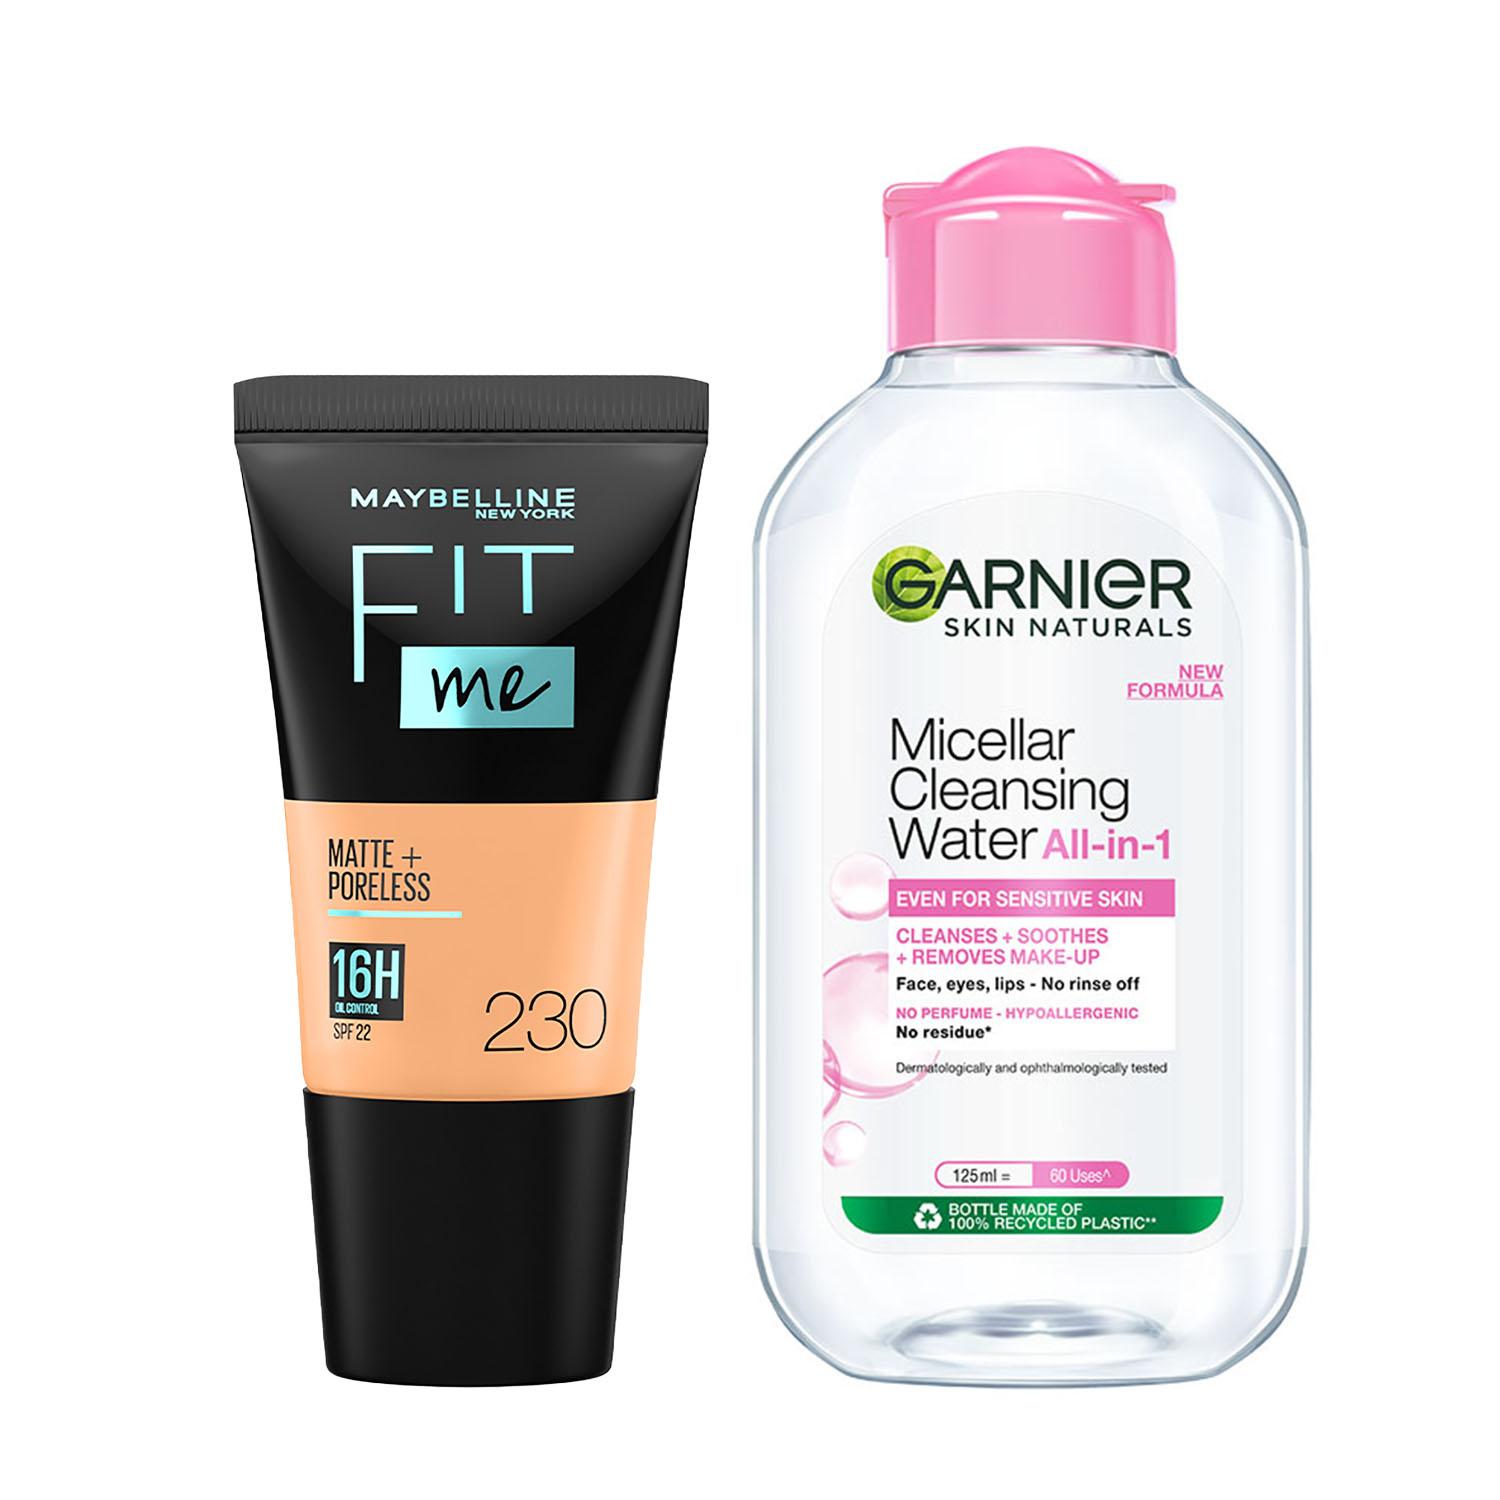 Maybelline New York | Maybelline New York Fit Me Foundation Tube, 230 with Garnier Micellar Cleansing Water Combo